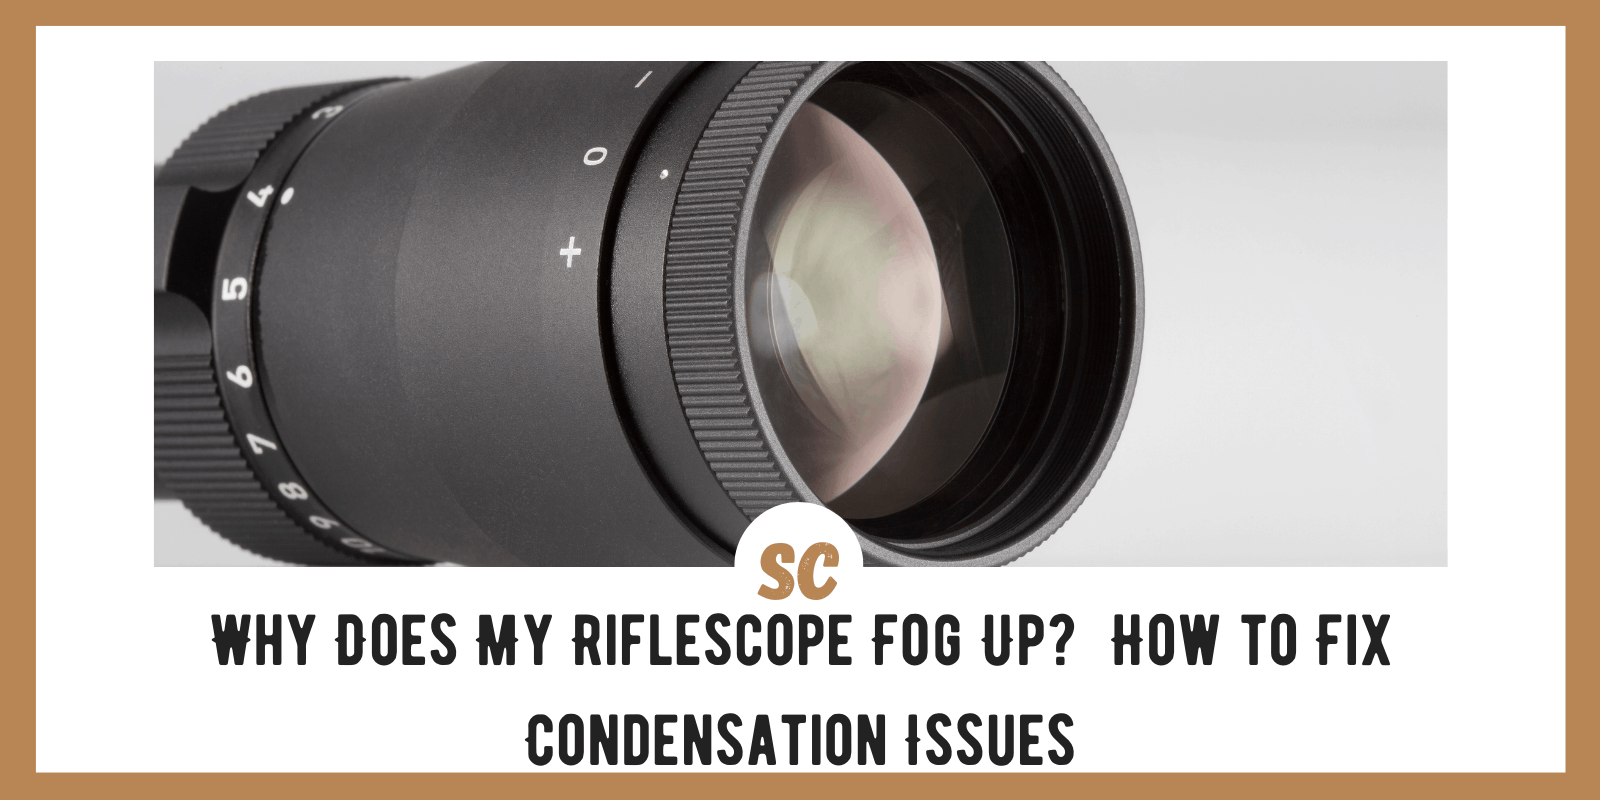 Why Does My Riflescope Fog Up? Fix Riflescope Condensation Issues